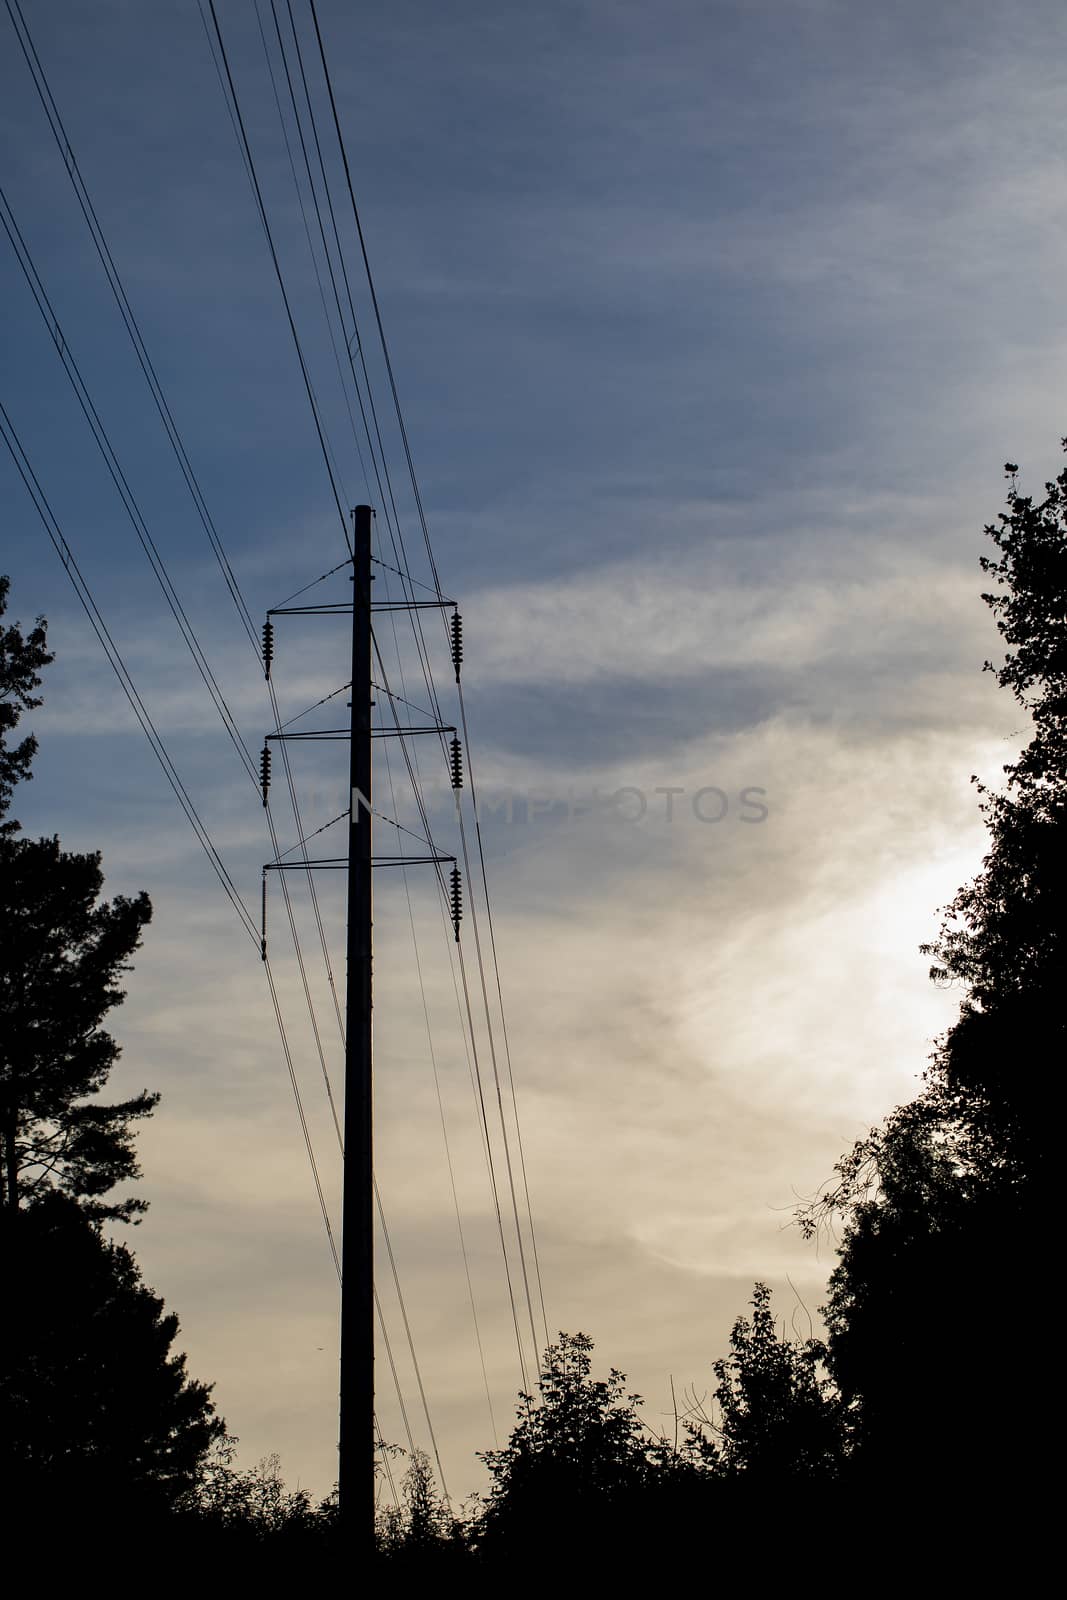 Pole type high tension electrical transmission tower with lines and insulators. Tower is seen in silhouette against partly cloudy sky.